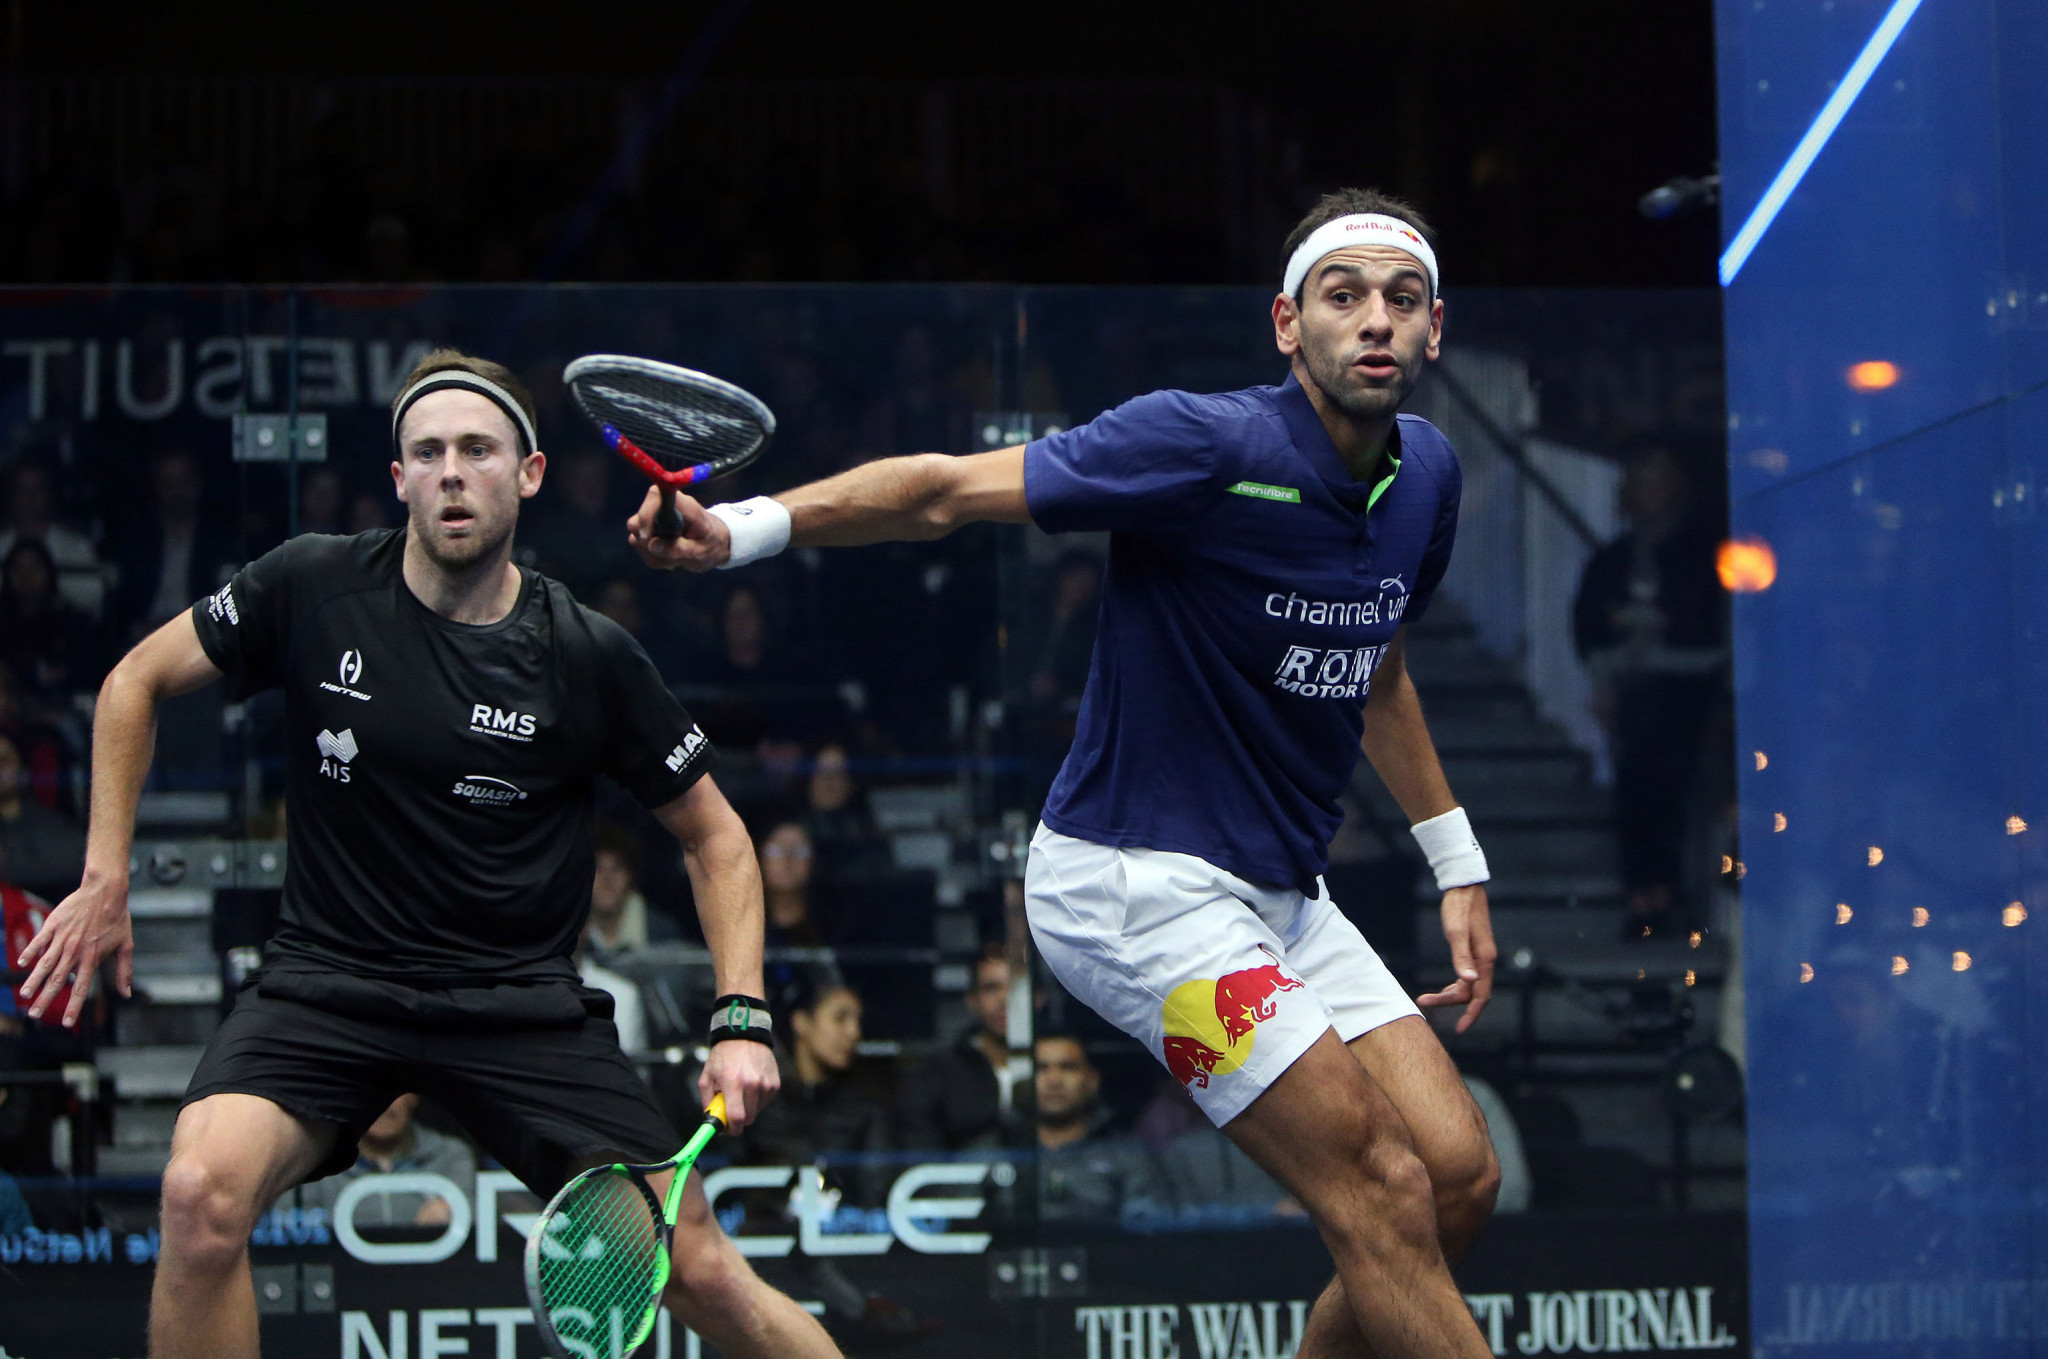 Mohamed ElShorbagy is through to the last four after defeating Australia's Ryan Cuskelly in straight games ©PSA